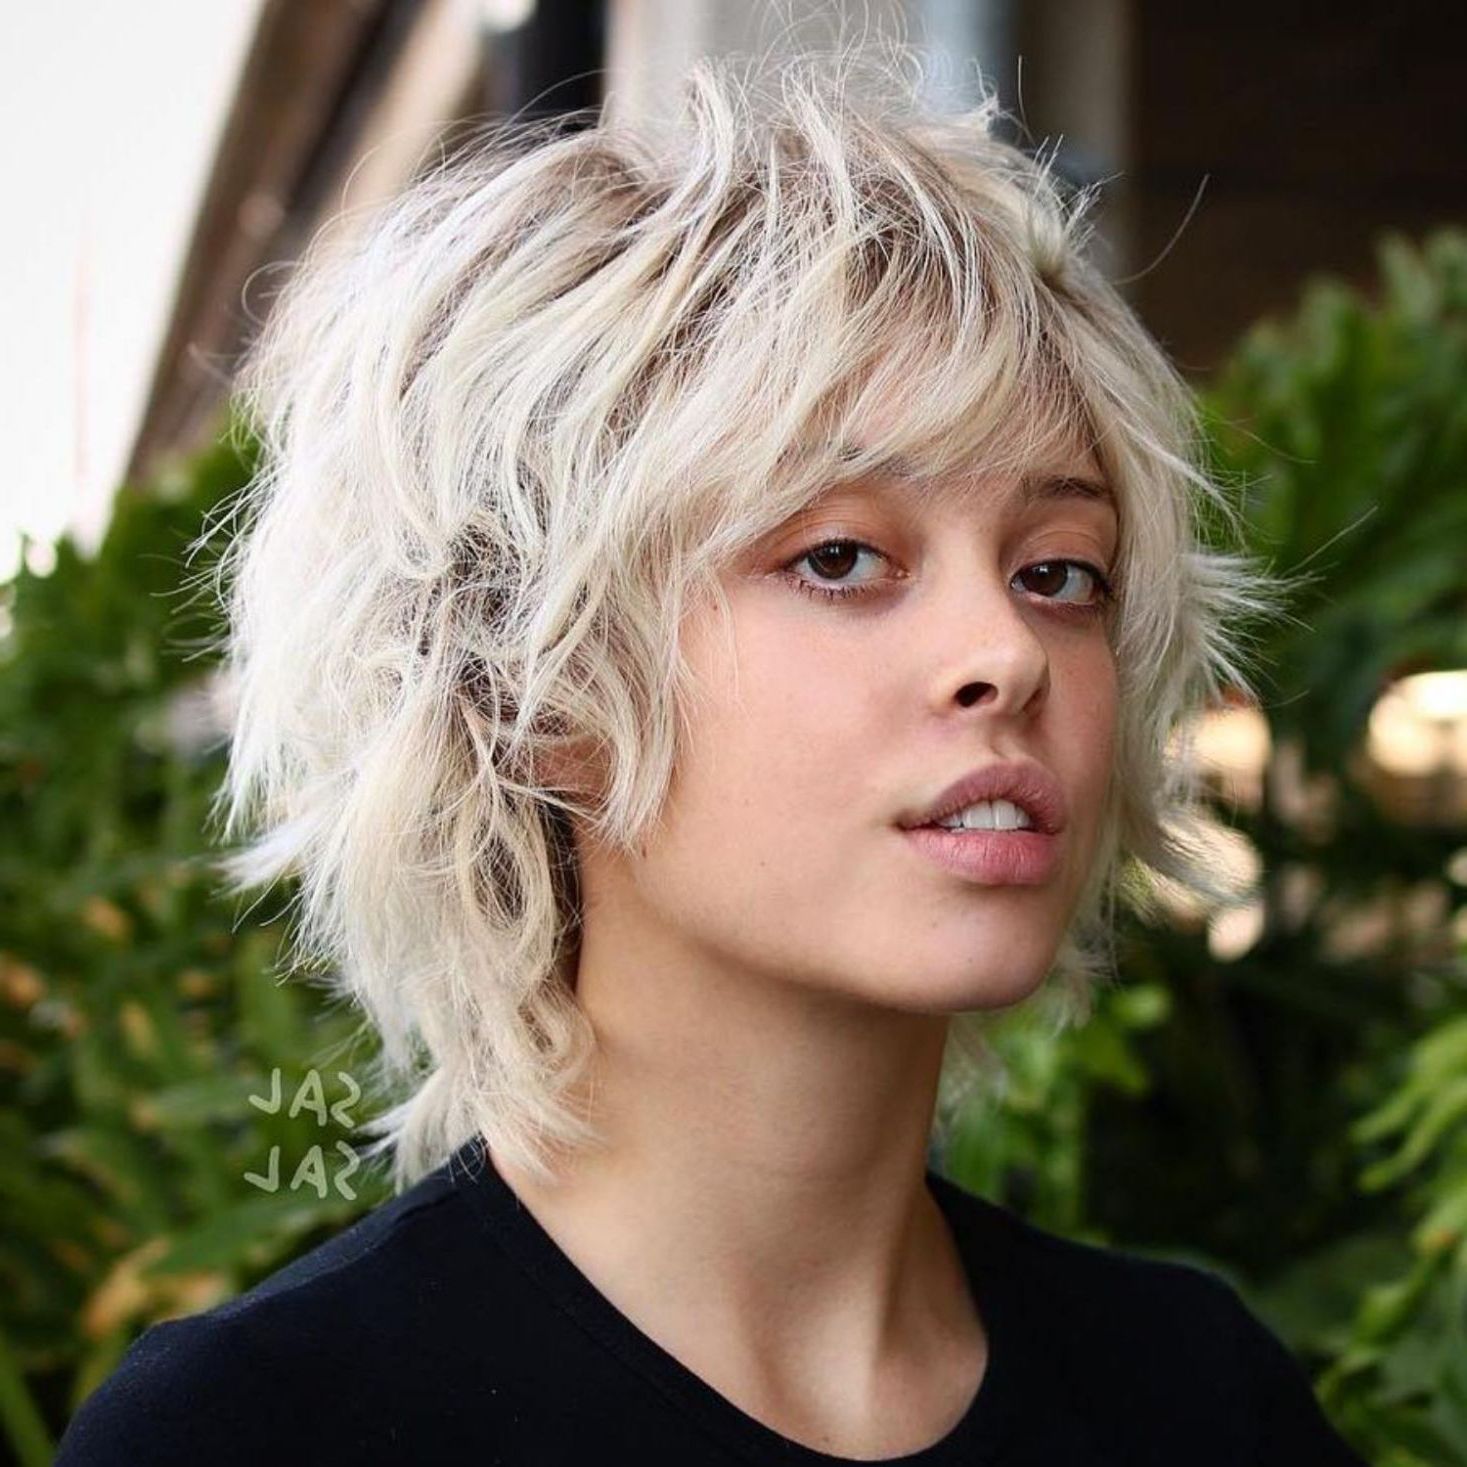 60 Most Universal Modern Shag Haircut Solutions In 2019 With Shaggy Blonde Bob Hairstyles With Bangs (View 5 of 20)